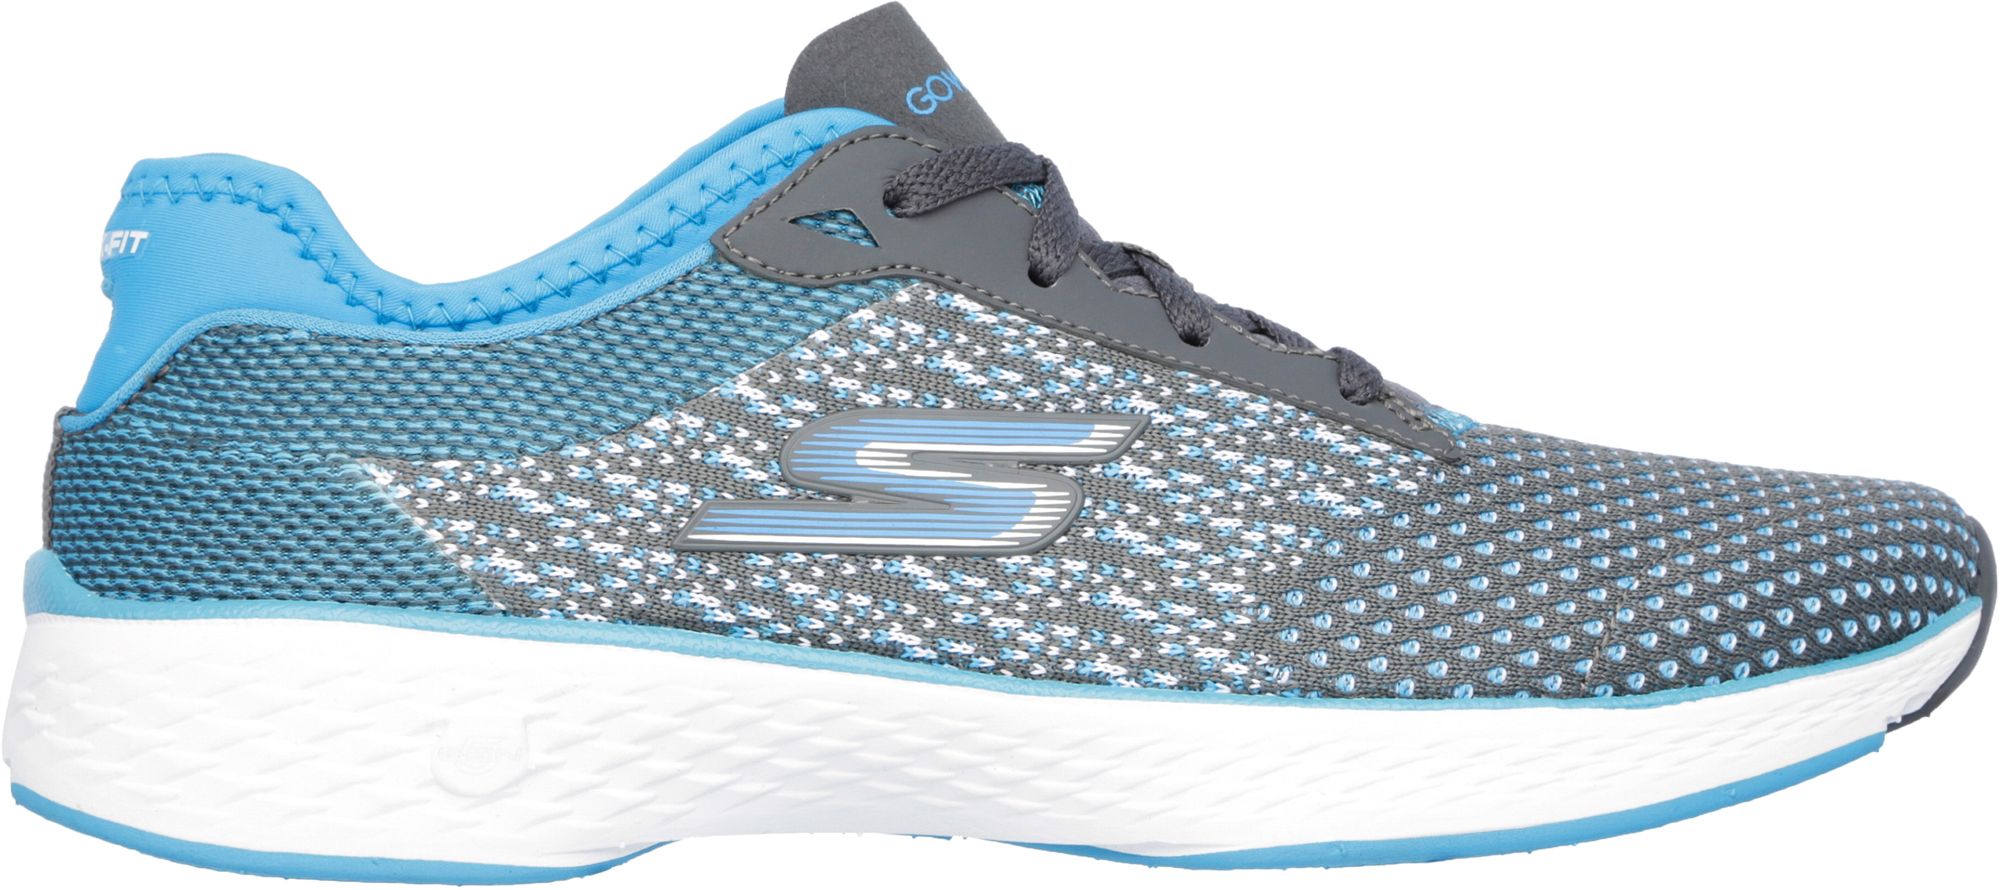 Skechers Shoes | DICK'S Sporting Goods